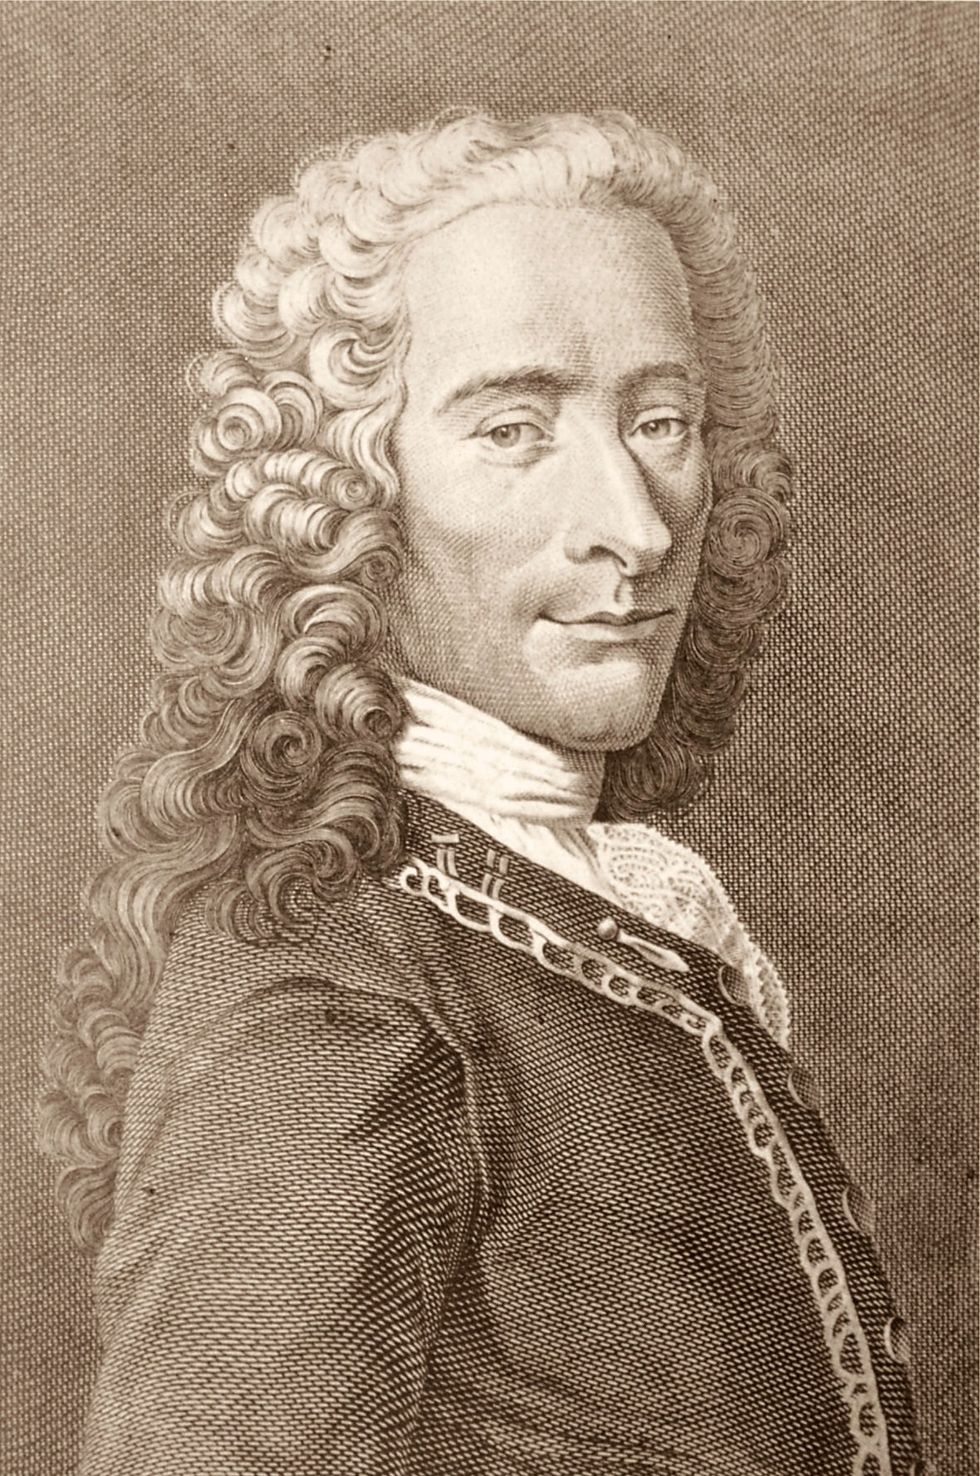 Life Lessons From Voltaire